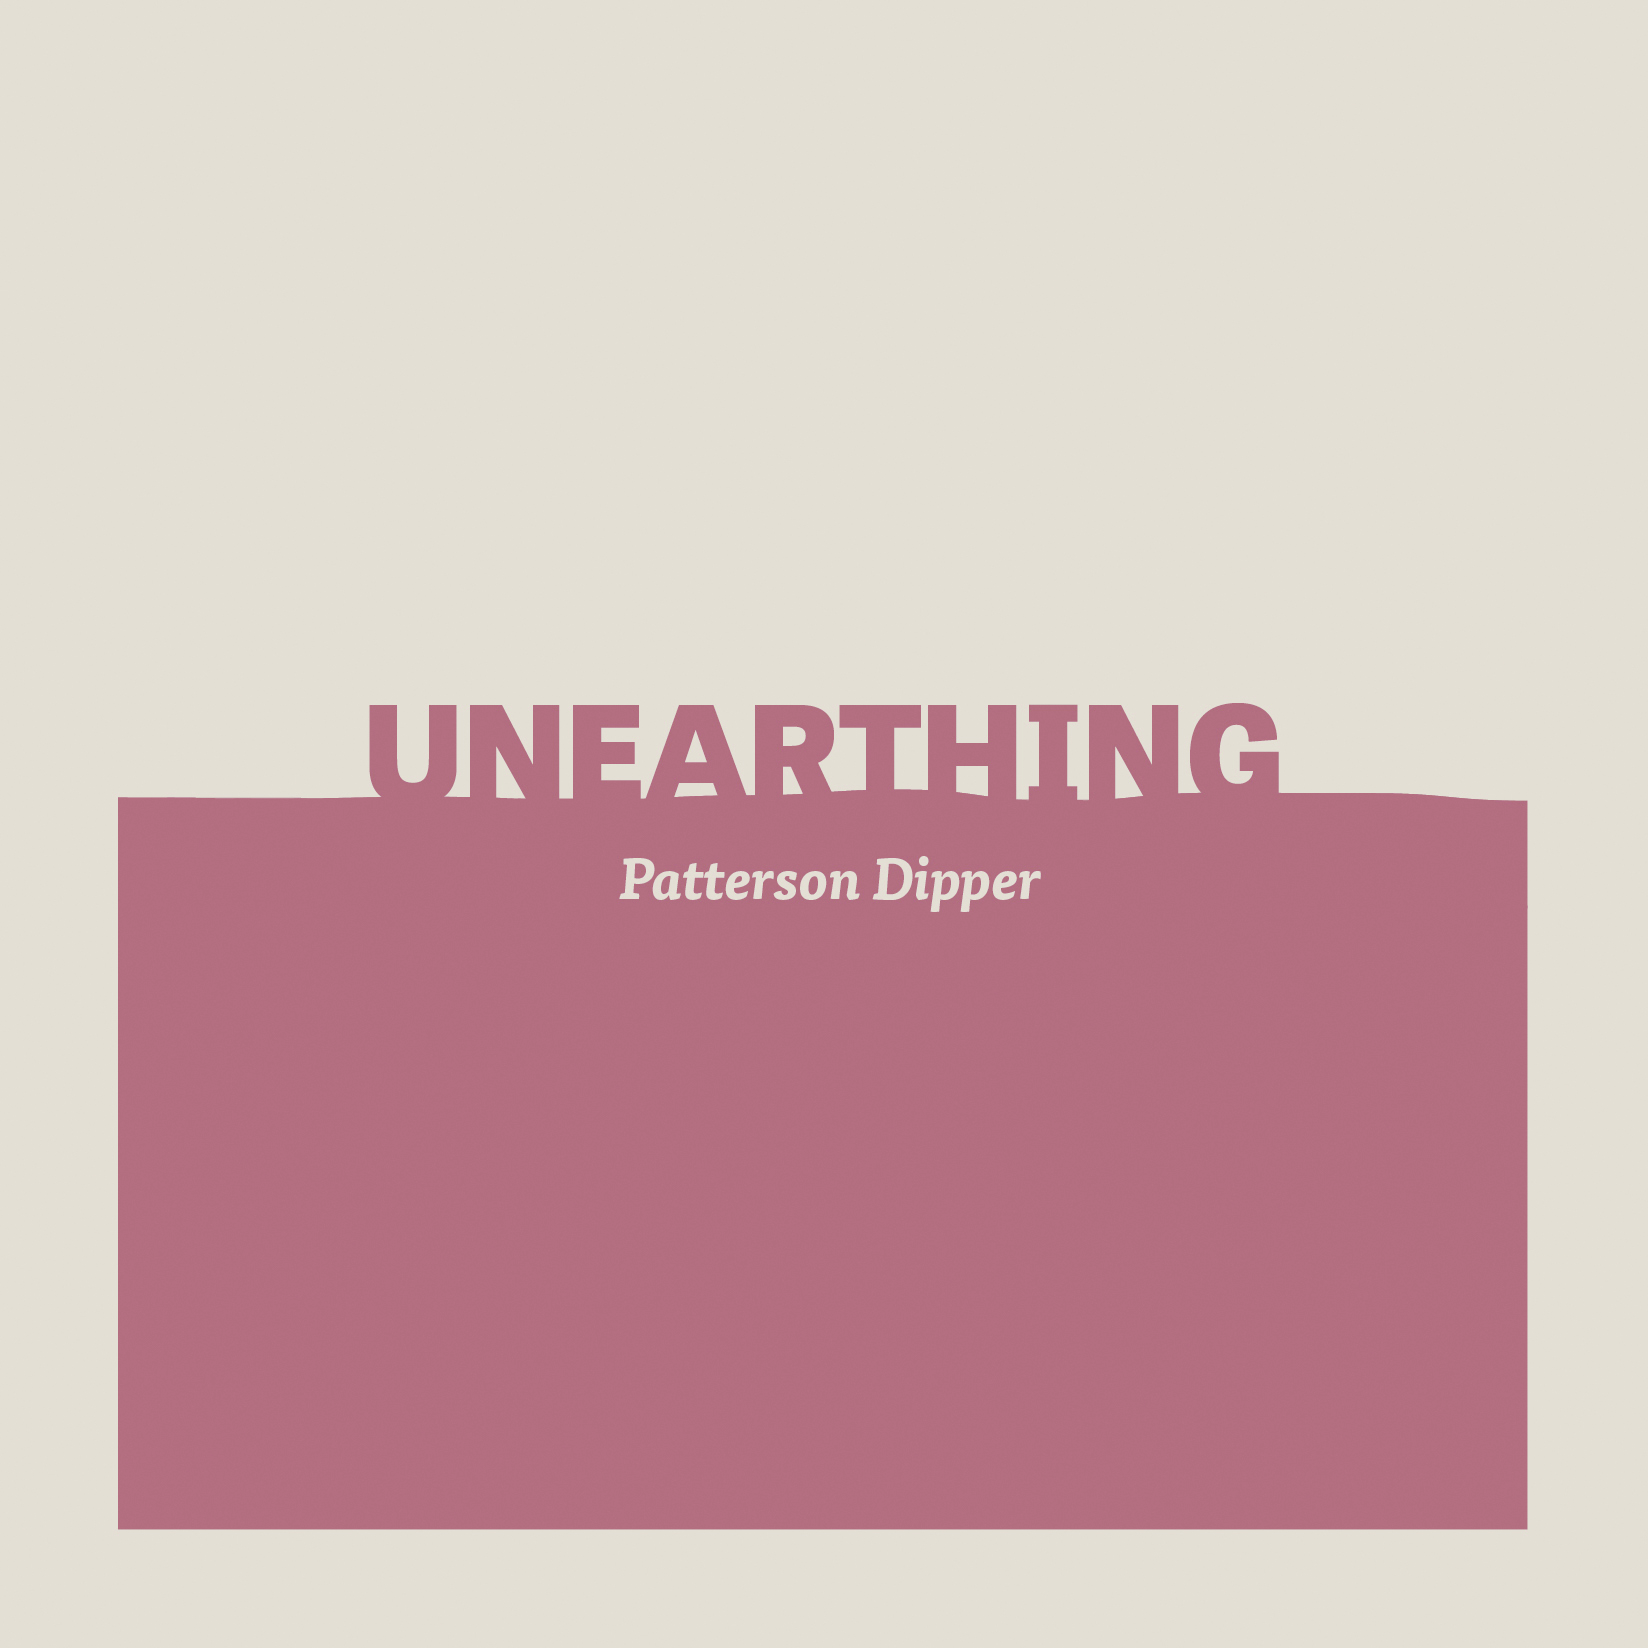 Review of Unearthing